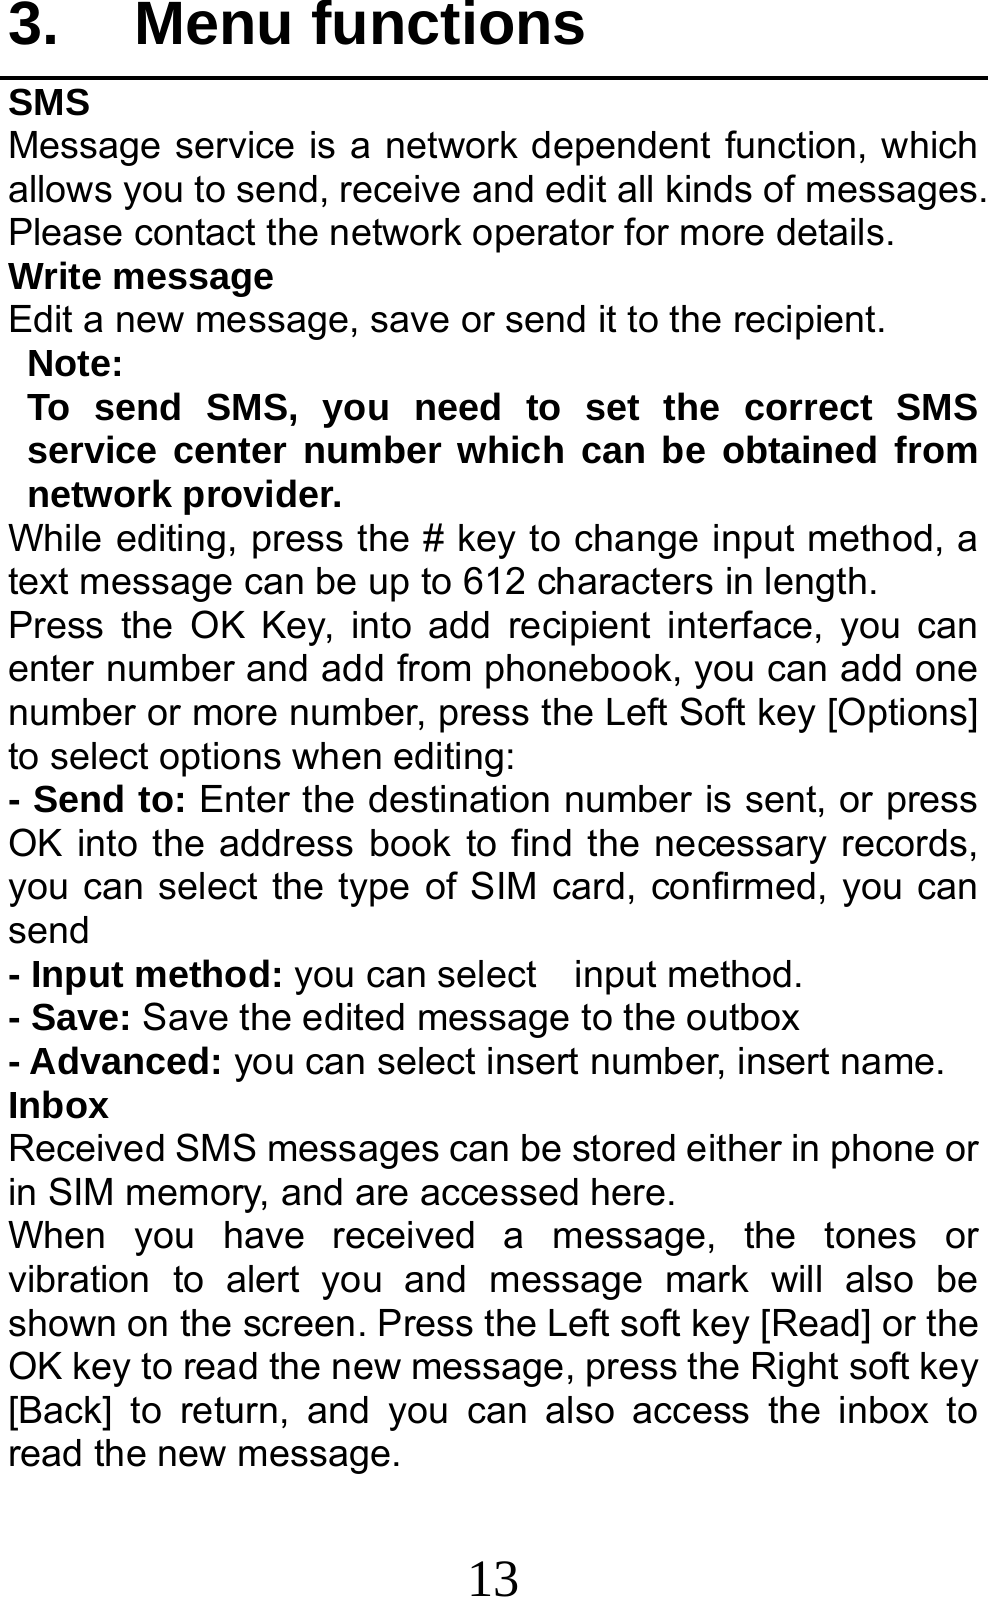 13 3. Menu functions SMS Message service is a network dependent function, which allows you to send, receive and edit all kinds of messages. Please contact the network operator for more details. Write message Edit a new message, save or send it to the recipient. Note:  To send SMS, you need to set the correct SMS service center number which can be obtained from network provider.   While editing, press the # key to change input method, a text message can be up to 612 characters in length.   Press the OK Key, into add recipient interface, you can enter number and add from phonebook, you can add one number or more number, press the Left Soft key [Options] to select options when editing: - Send to: Enter the destination number is sent, or press OK into the address book to find the necessary records, you can select the type of SIM card, confirmed, you can send - Input method: you can select    input method. - Save: Save the edited message to the outbox - Advanced: you can select insert number, insert name. Inbox Received SMS messages can be stored either in phone or in SIM memory, and are accessed here. When you have received a message, the tones or vibration to alert you and message mark will also be shown on the screen. Press the Left soft key [Read] or the OK key to read the new message, press the Right soft key [Back] to return, and you can also access the inbox to read the new message. 